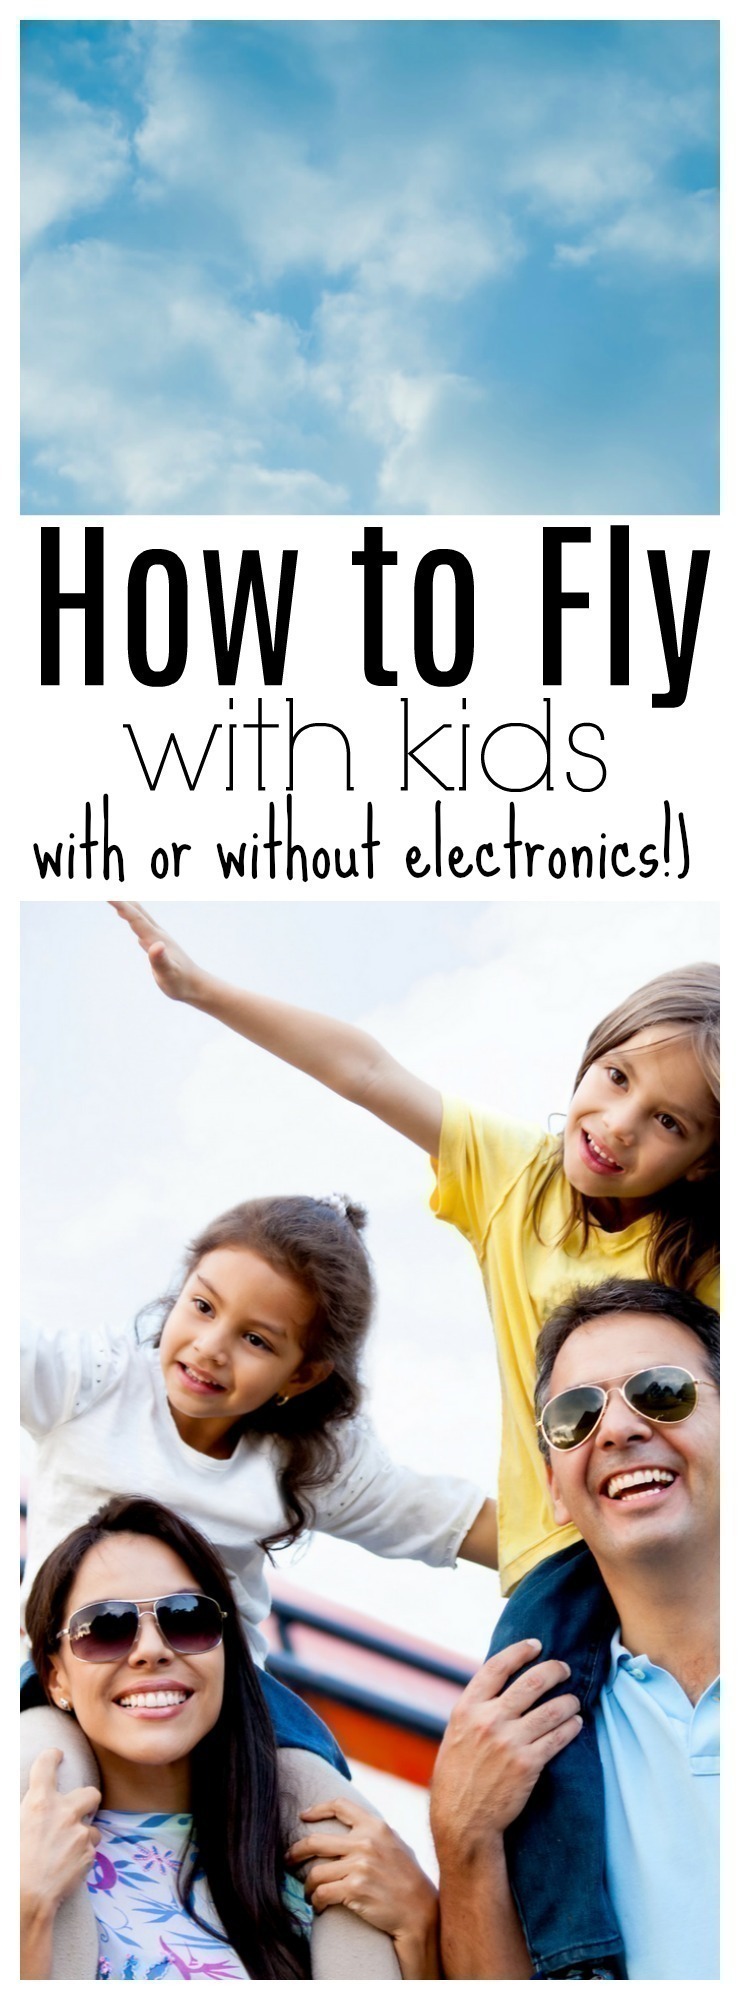 Flying with kids can be stressful - traveling by car OR plane is not an easy feat. Thankfully there are many things you can do to keep them engaged - with or without electronic devices. 